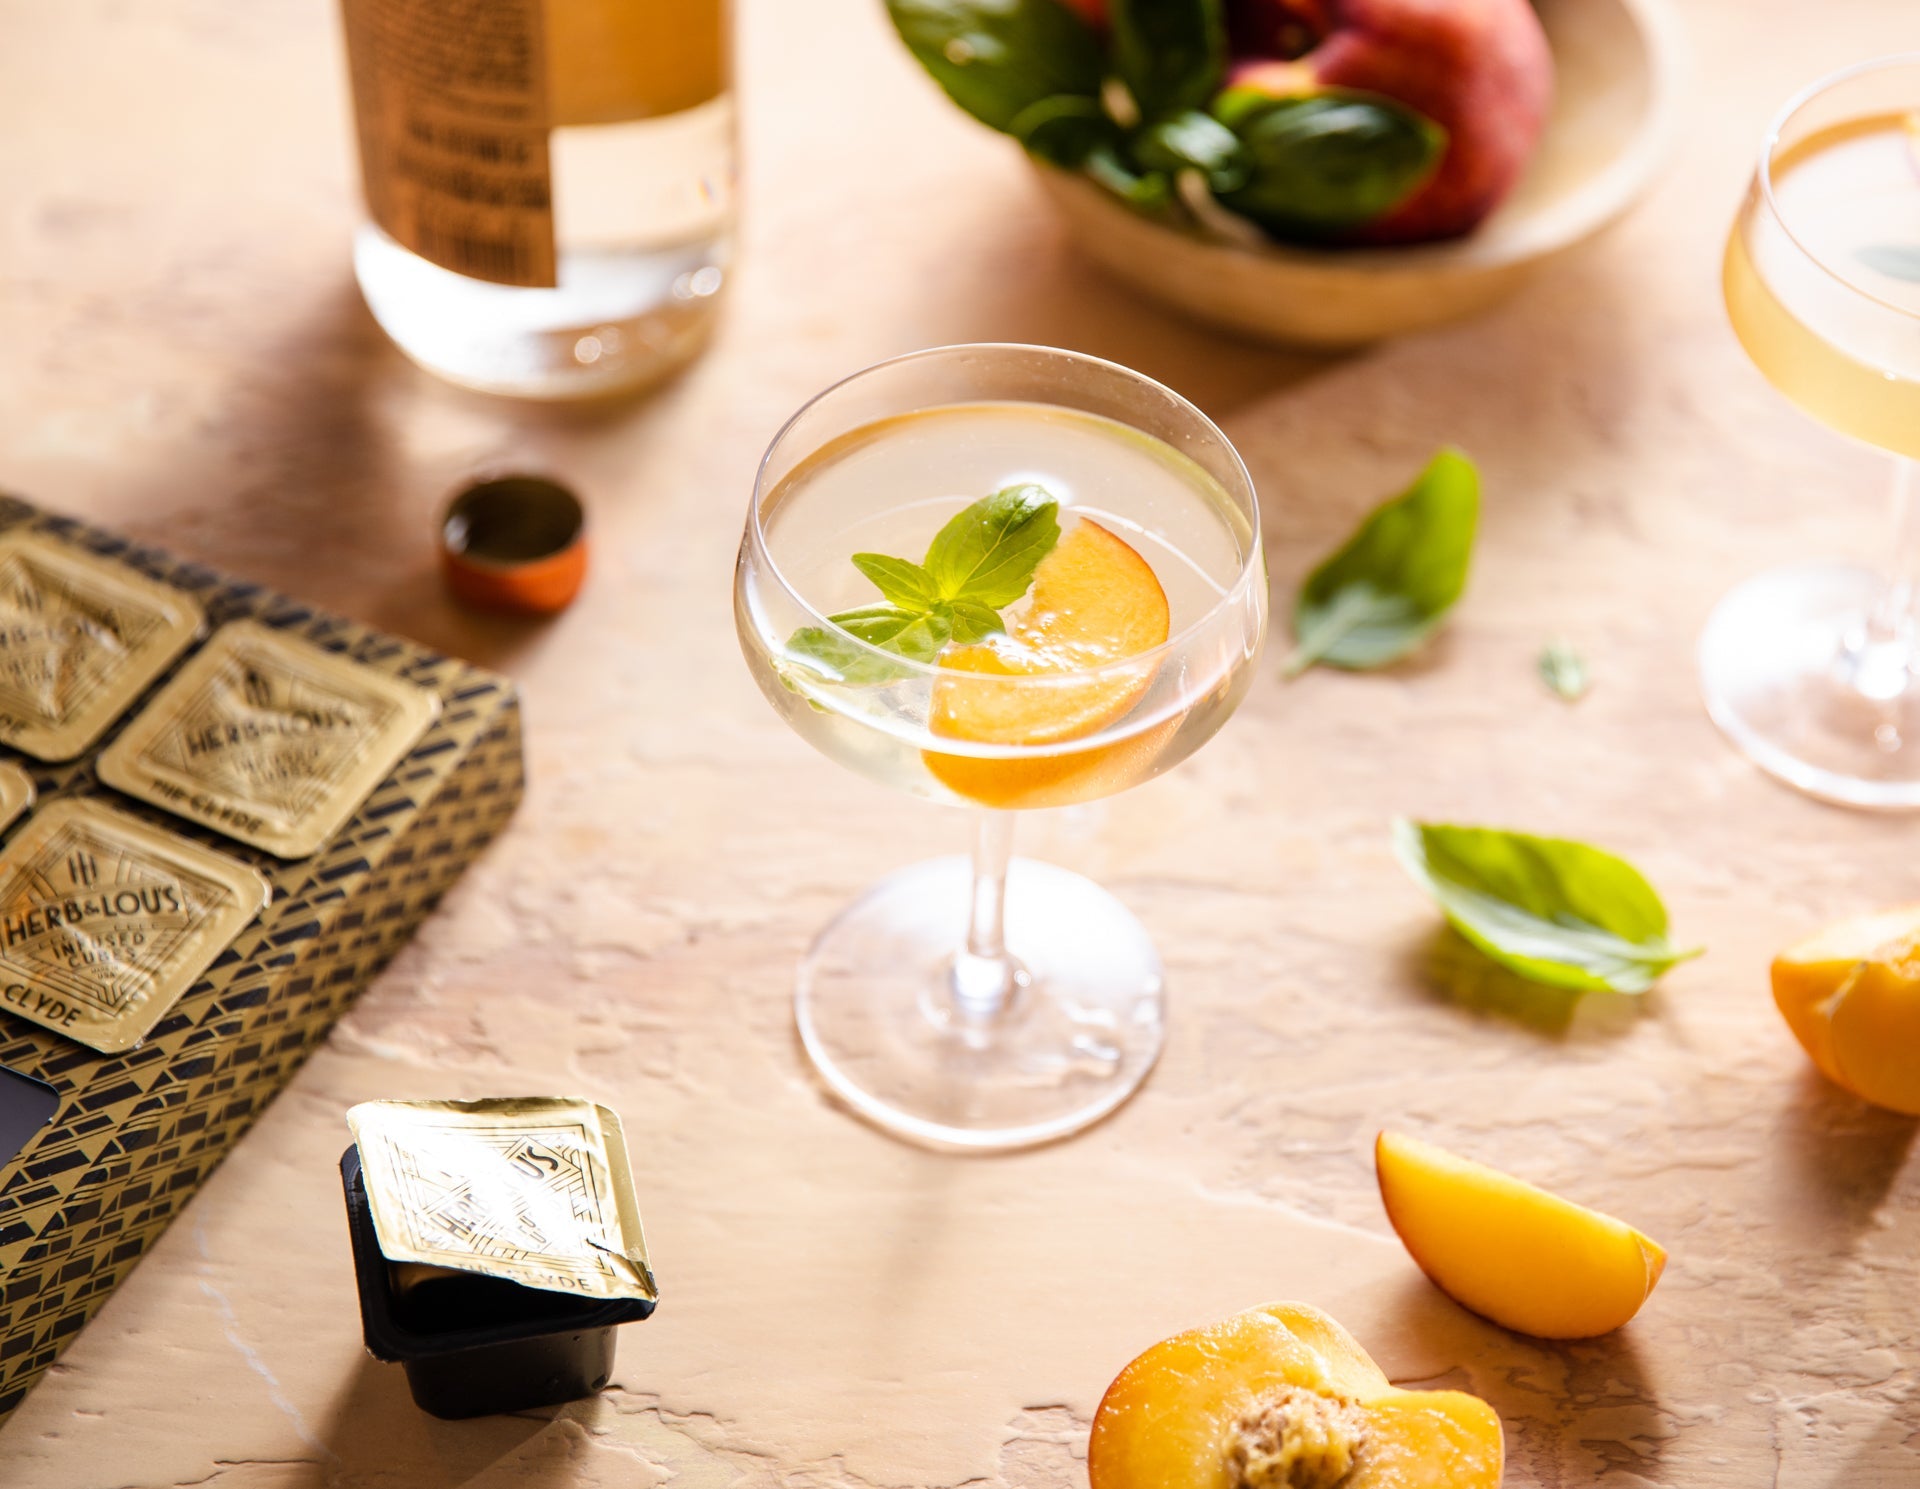 glass filled with Peach Cosmopolitan with Benedictine-Inspired Herbs & Artisanal Bitters arranged with peaches, leaves, bottles, and glasses.